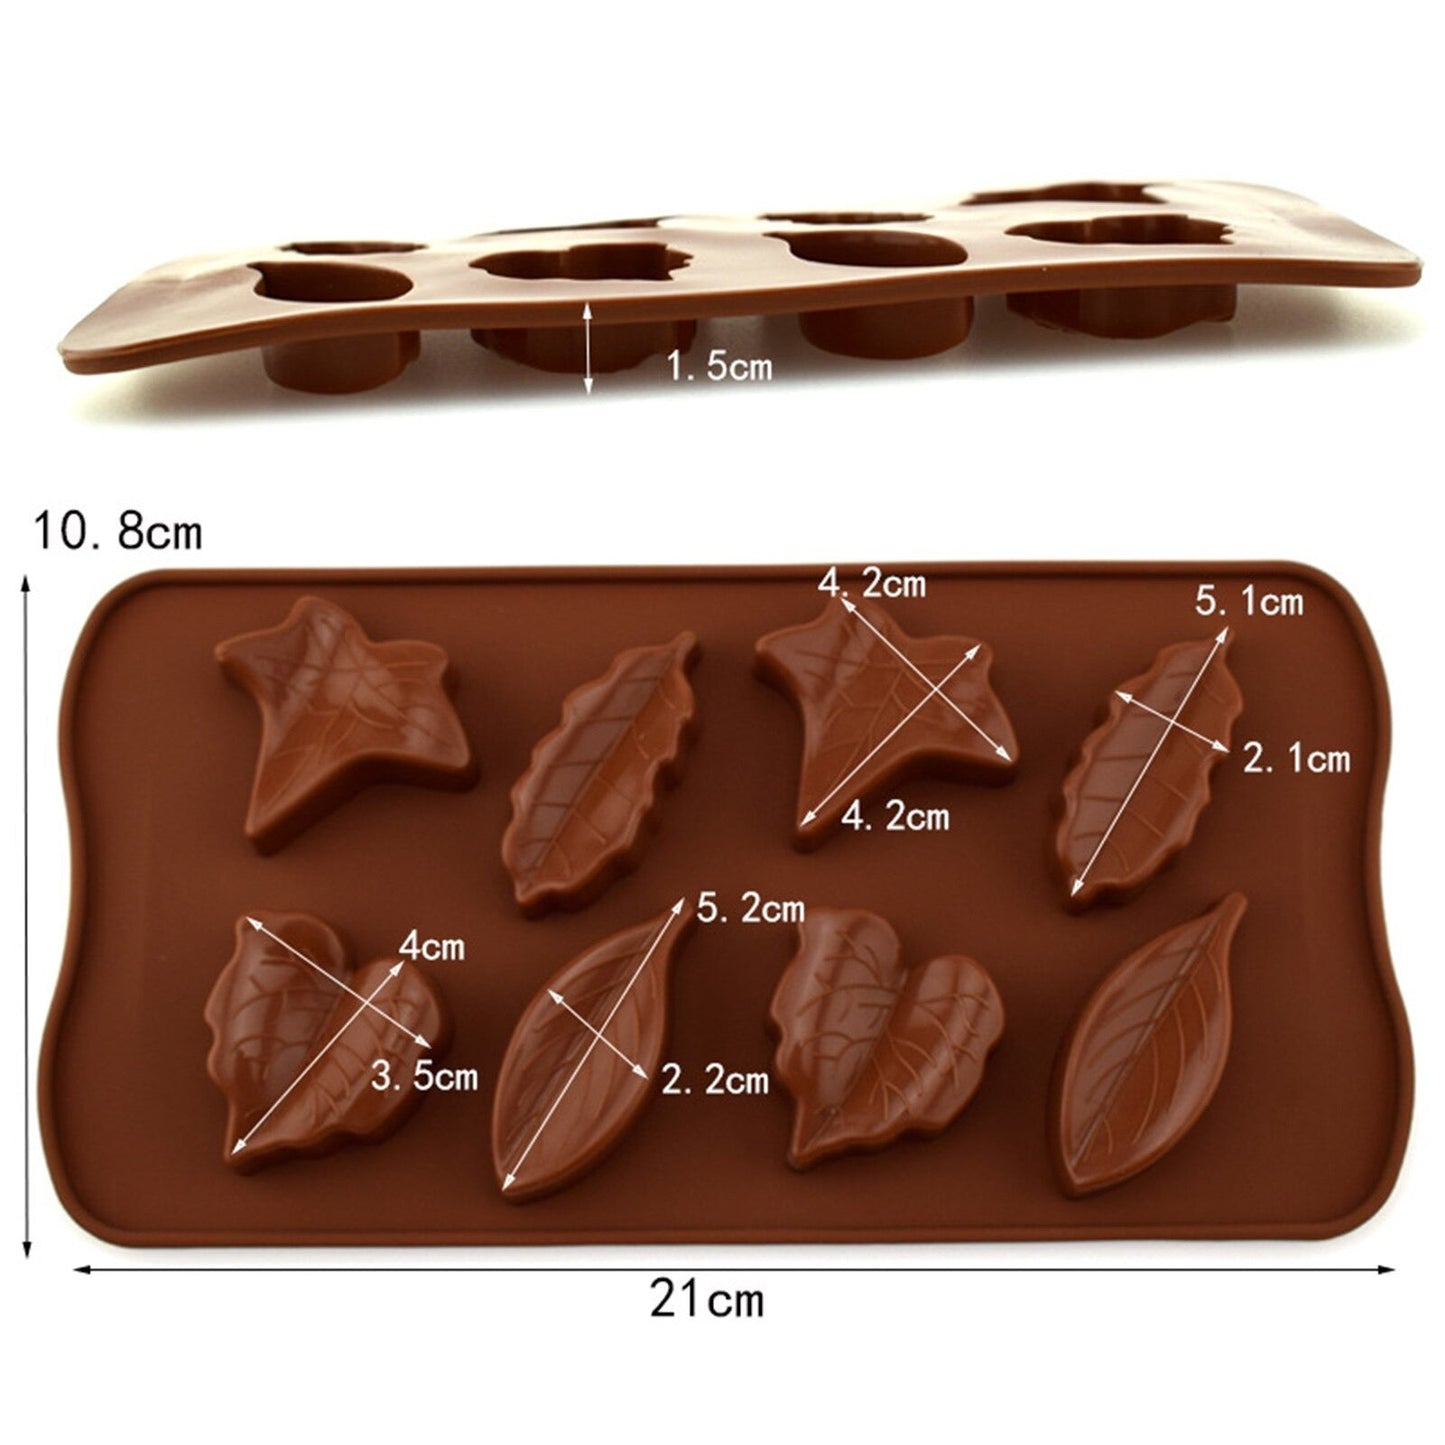 Tree Leaves Silicone Chocolate & Candy Mold 8 Cavity